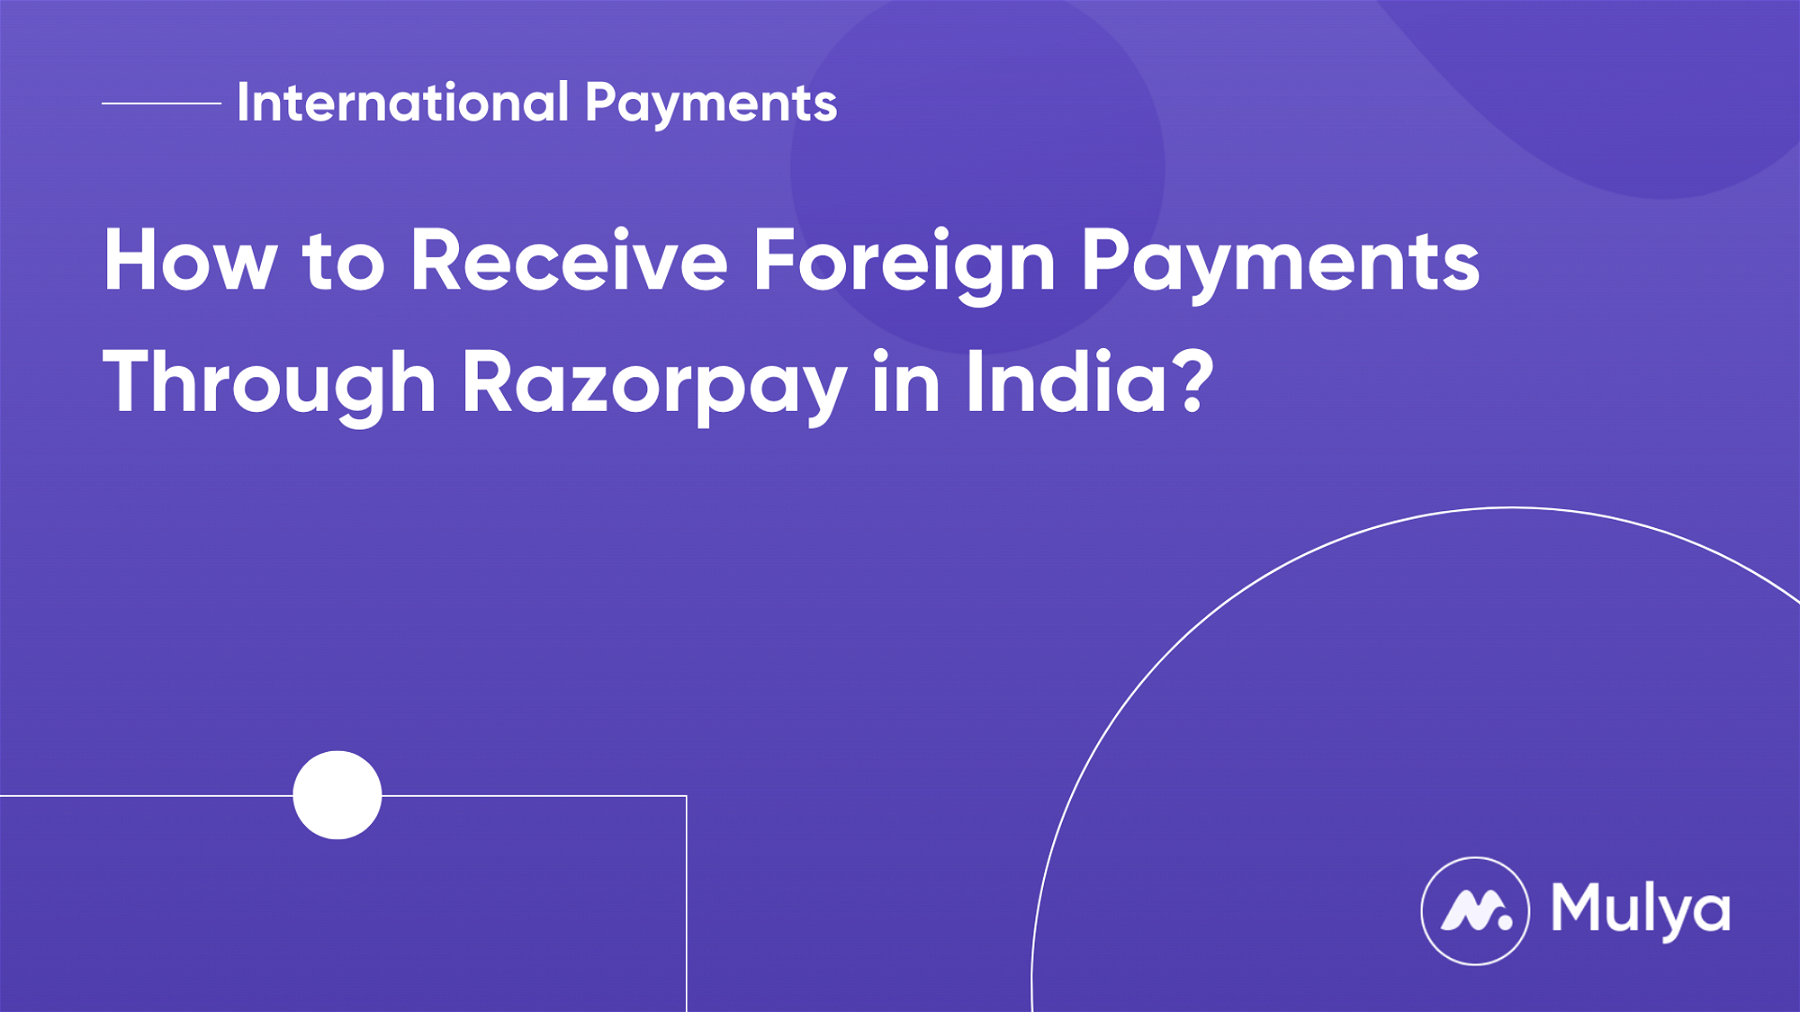 How to Receive Foreign Payments Through Razorpay in India?